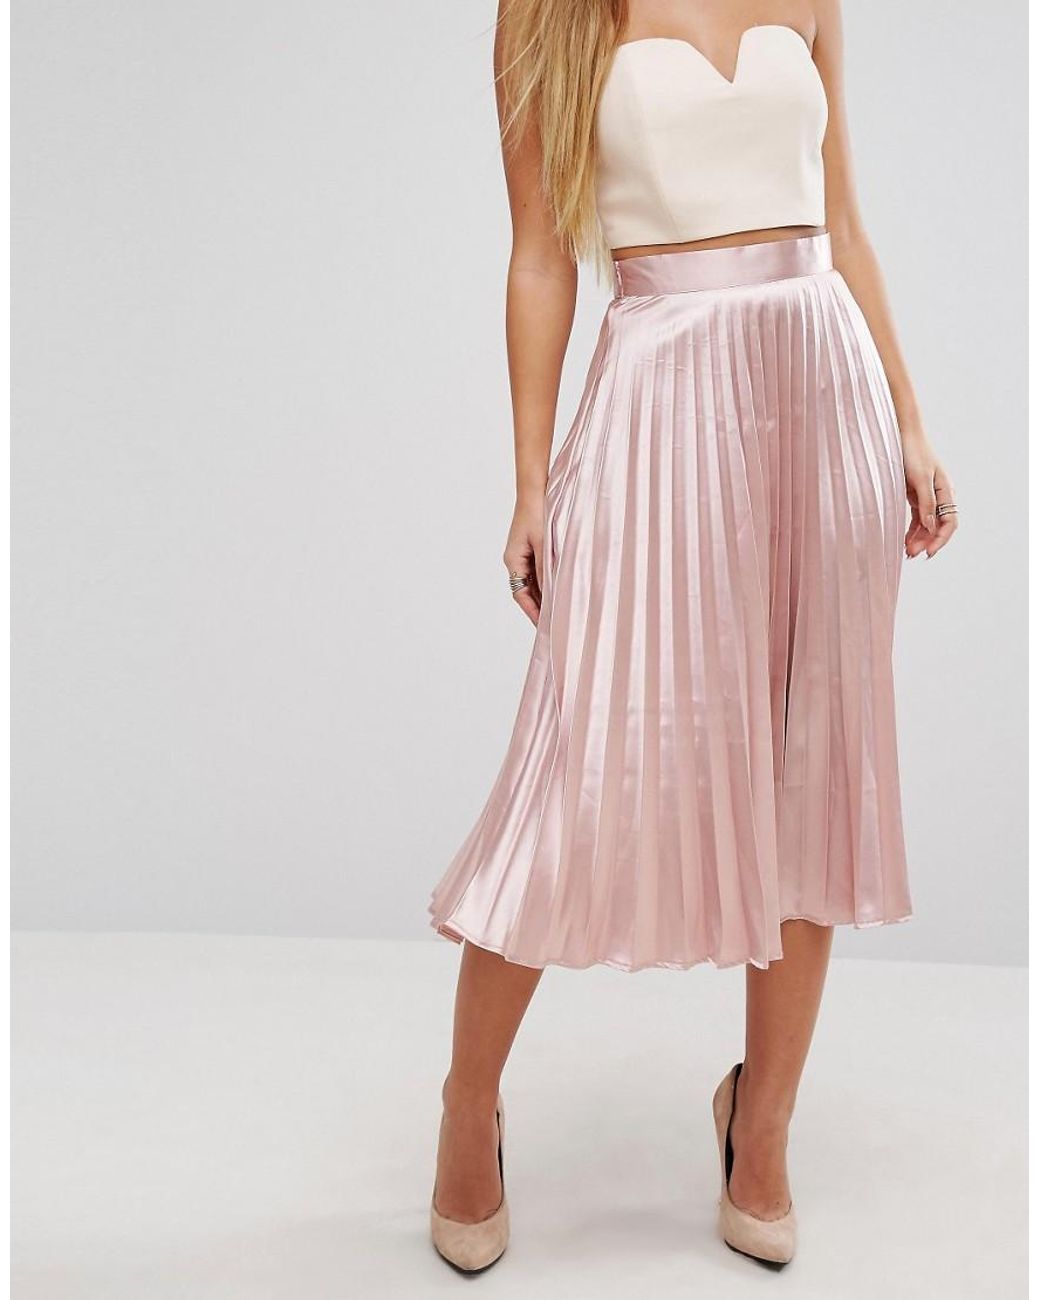 PrettyLittleThing Satin Pleated Skirt in Pink | Lyst UK